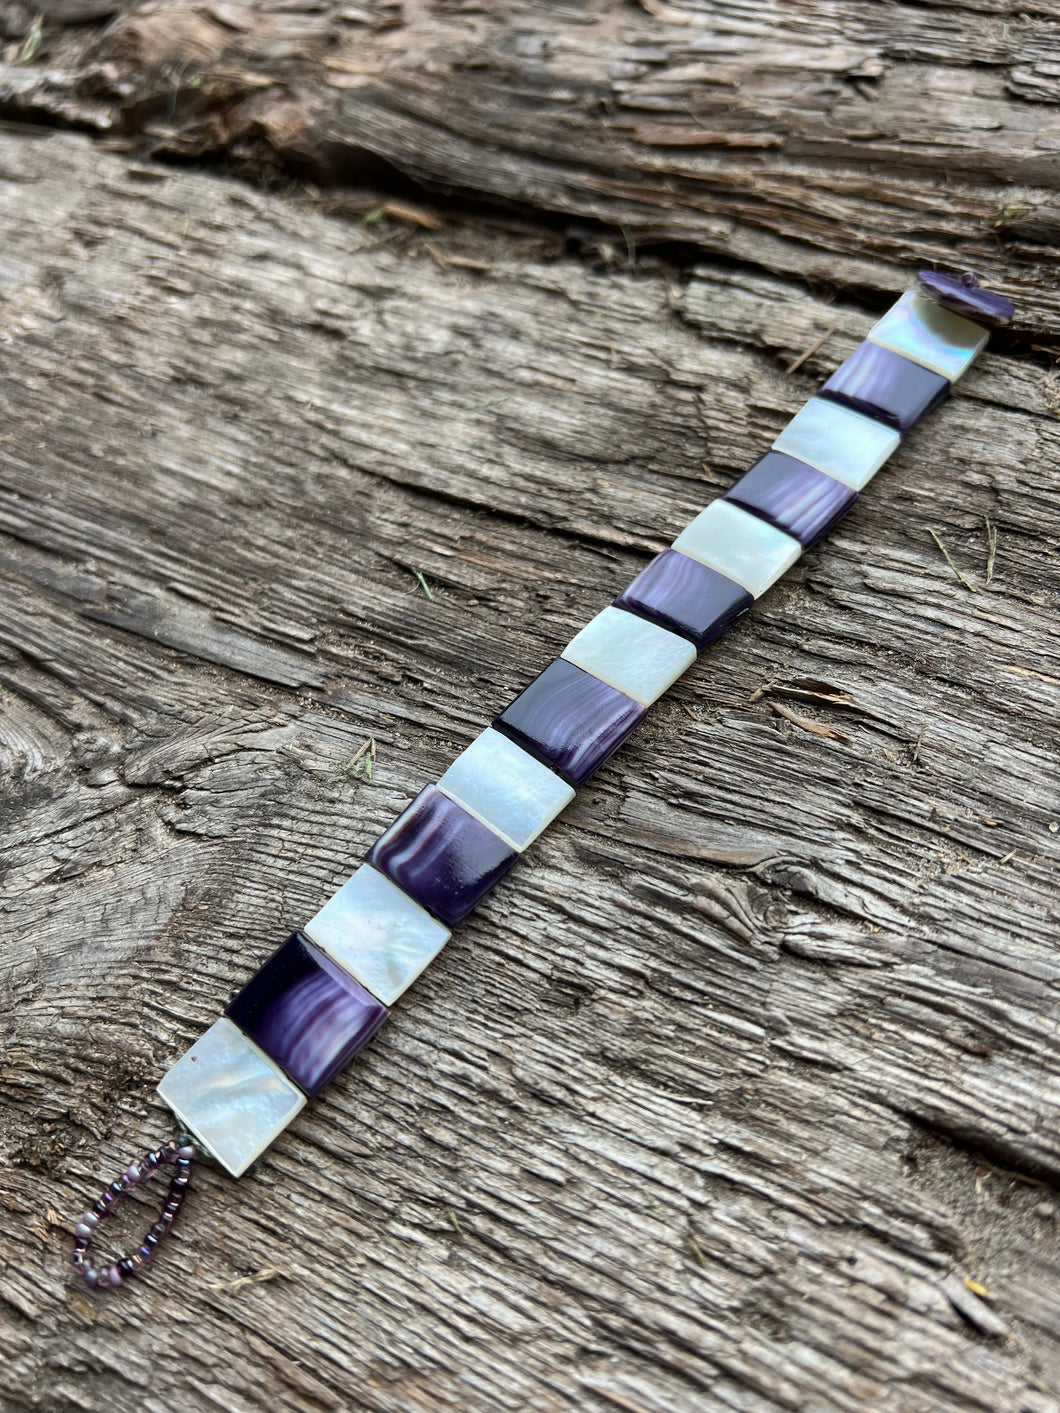 Wampum and mother of pearl bracelet